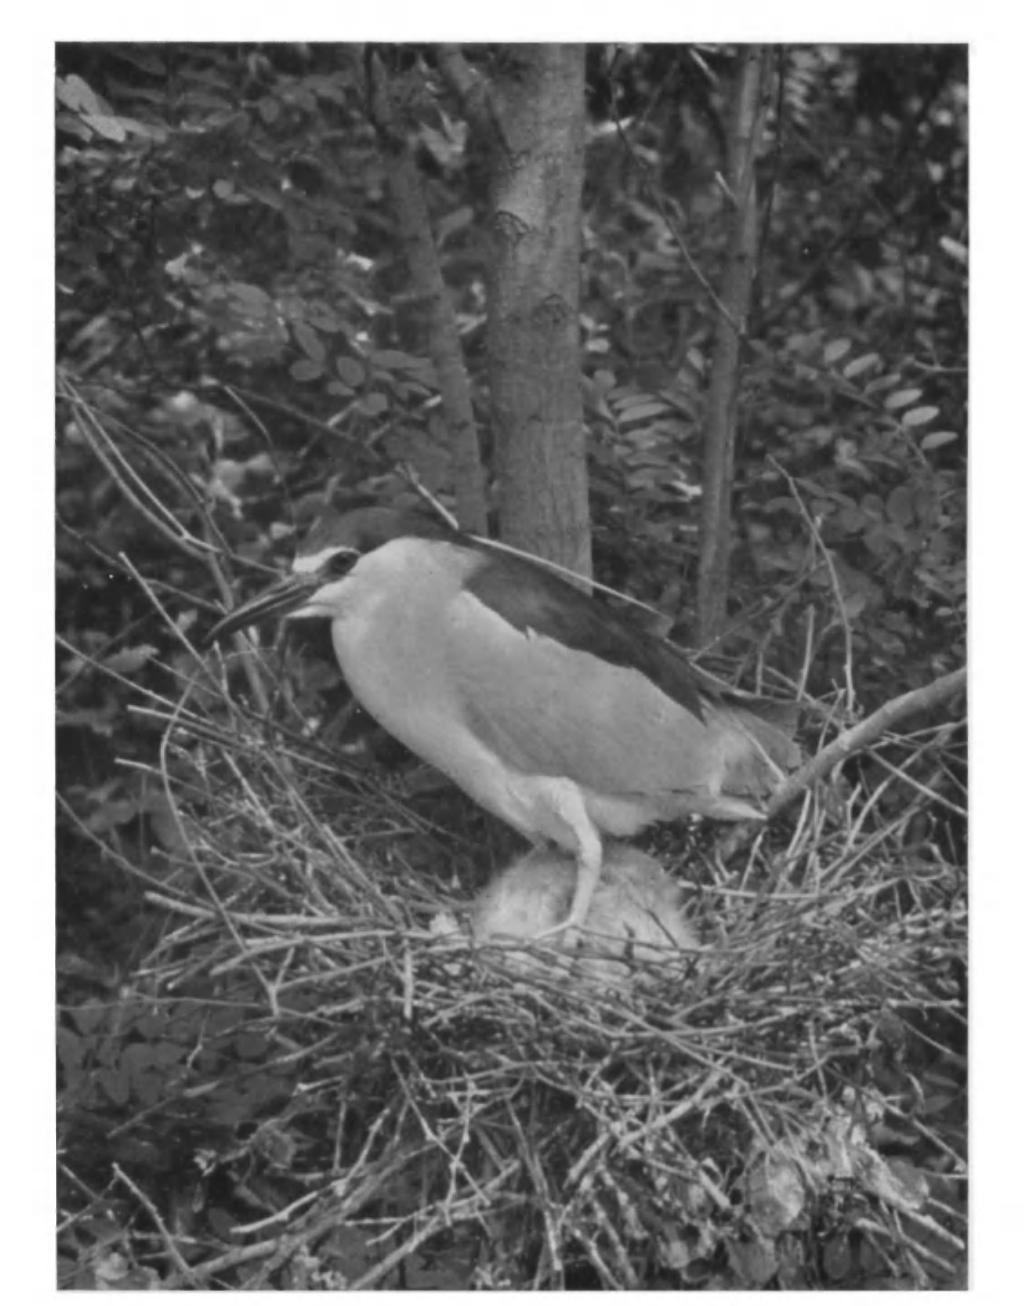 British Birds, Vol. xlvii, PI. 53. ADULT AT NEST WITH YOUNG. CAMARGUE, SOUTH FRANCE. MAY, 1949. (Photographed by H. A. PATRICK).